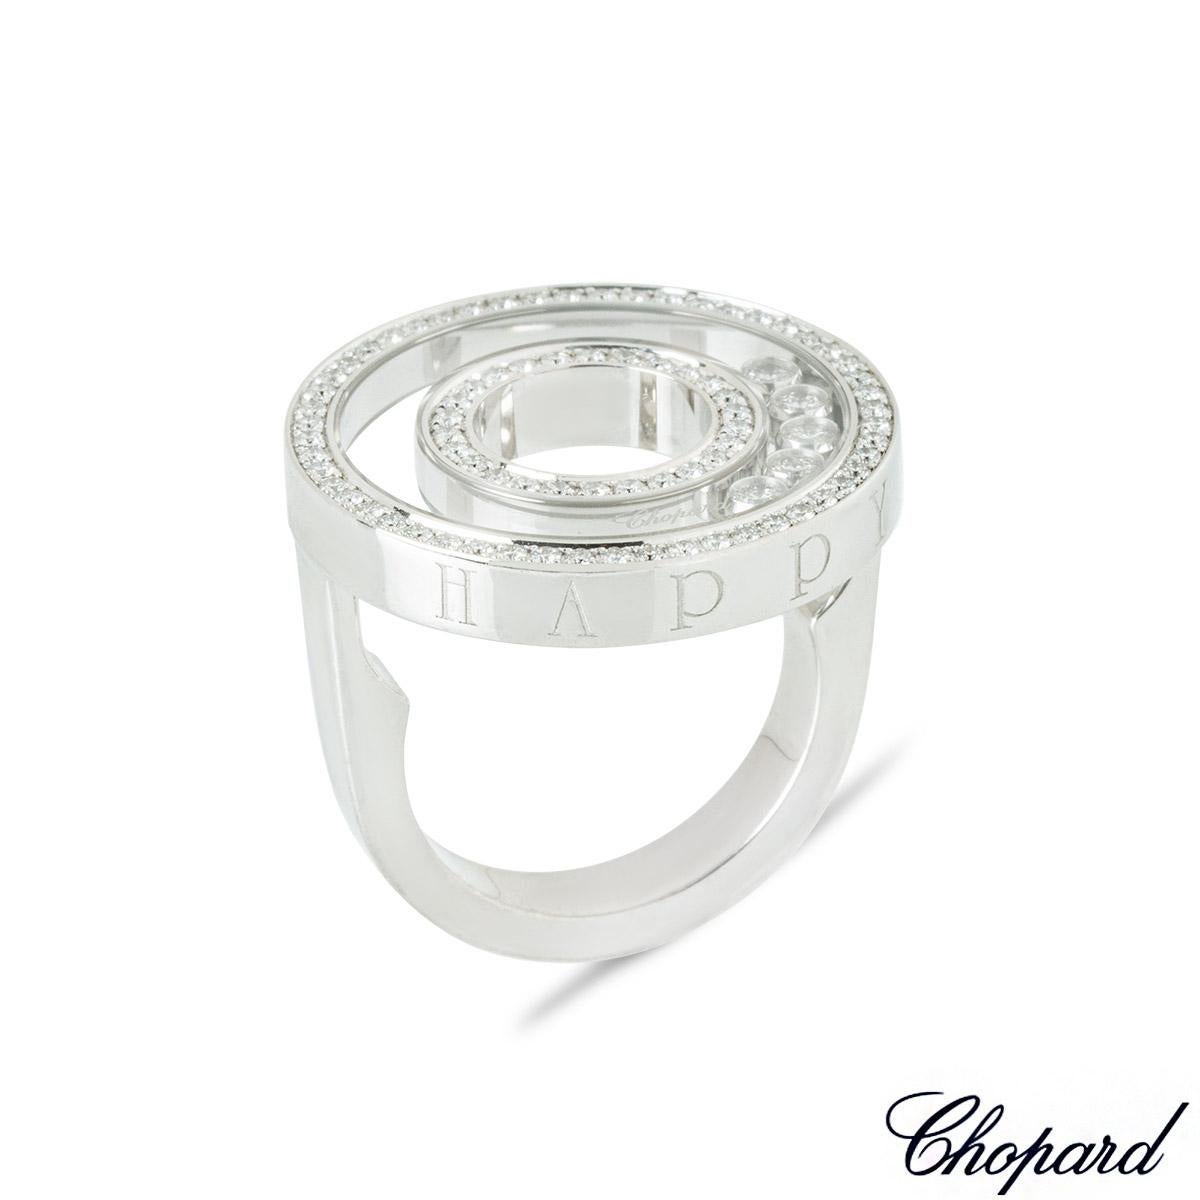 A beautiful 18k white gold diamond ring by Chopard from the Happy Diamonds collection. The openwork circular motif ring features 53 round brilliant cut diamonds set to the outer edge and 26 round brilliant cut diamonds pave set to the inner edge